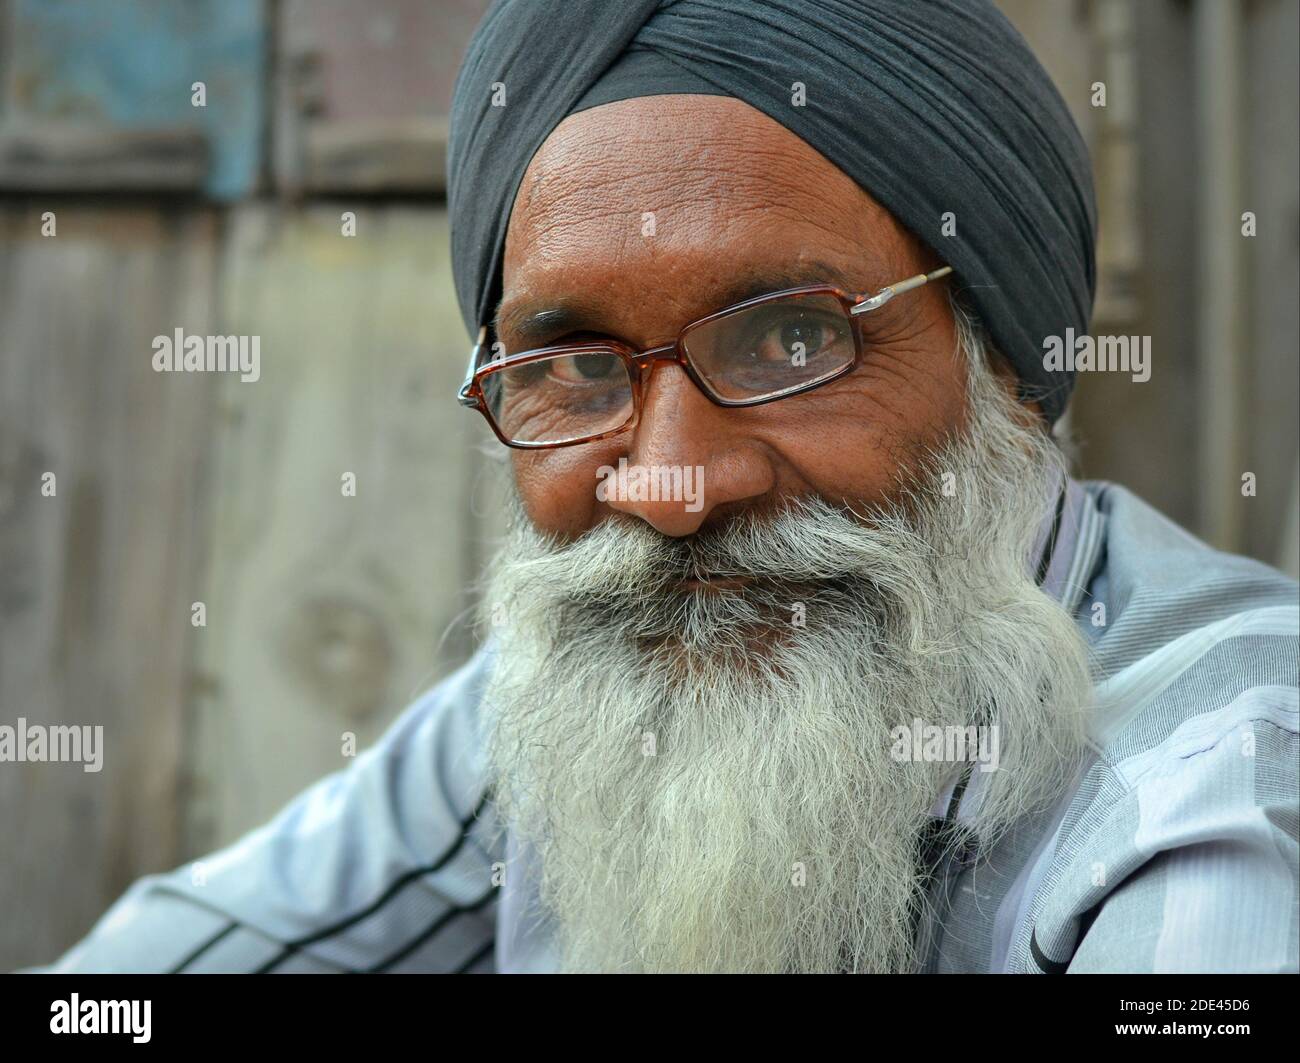 Friendly elderly Indian Sikh man with traditional black dastar turban, long white beard and rectangular eyeglasses poses for the camera. Stock Photo